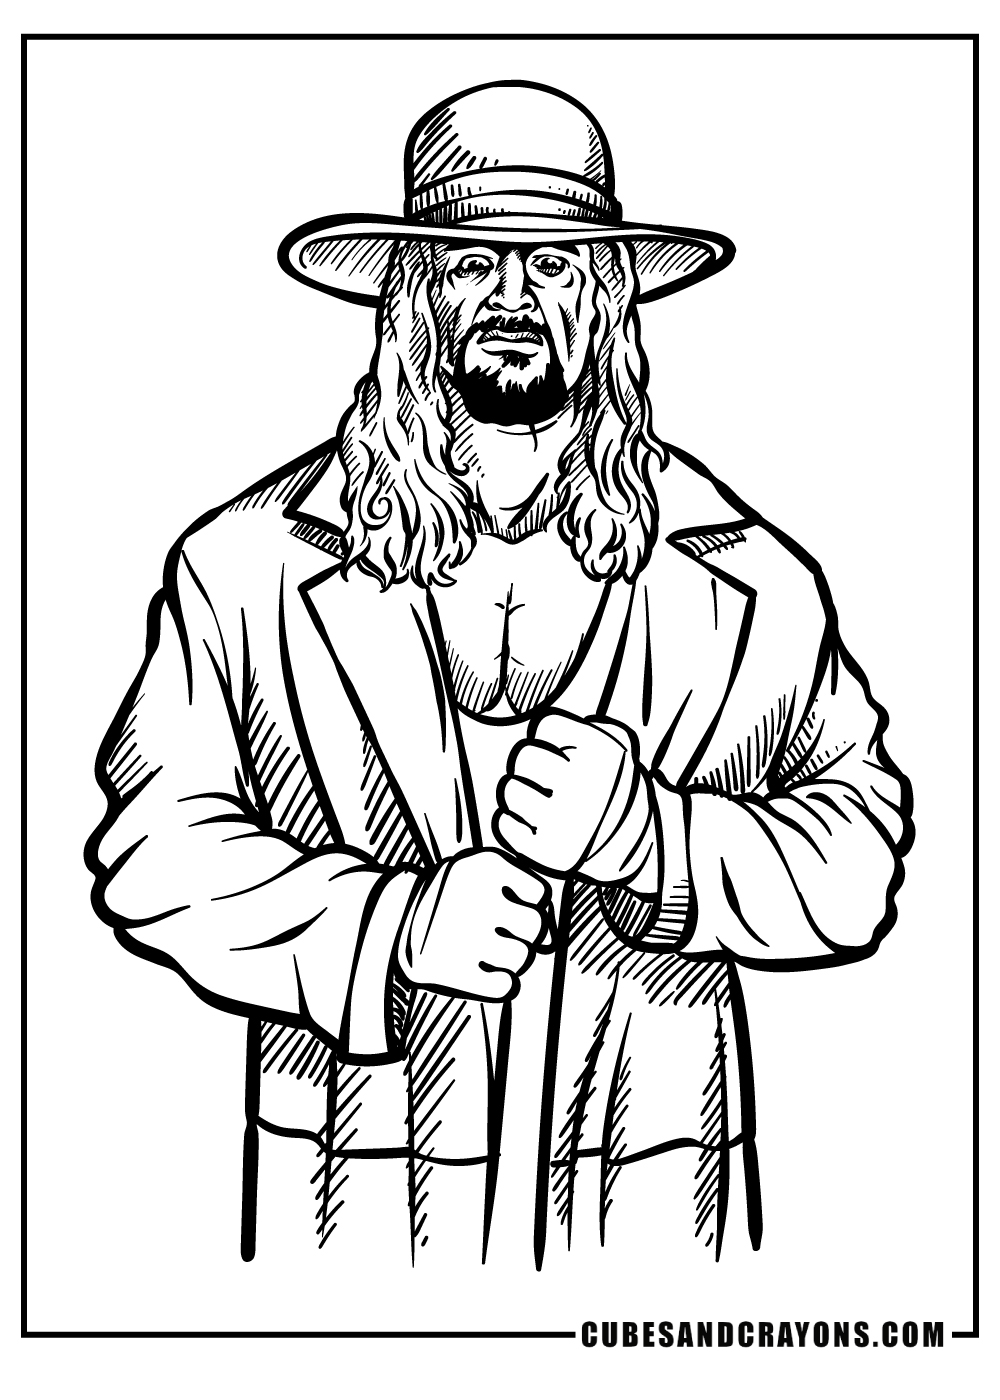 WWE Coloring Pages for adults free printable